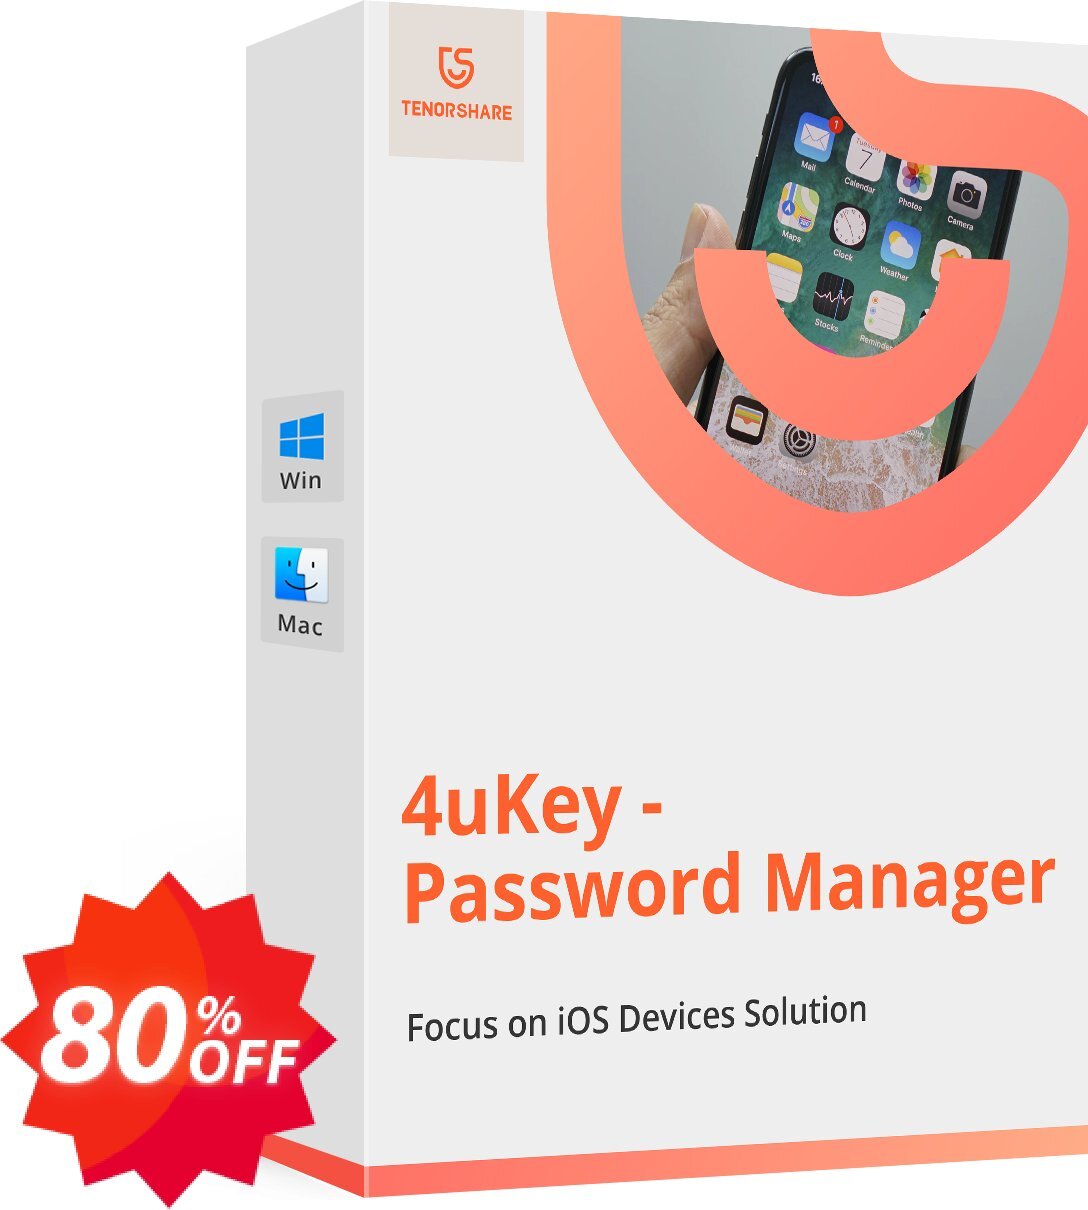 Tenorshare 4uKey Password Manager for MAC, Lifetime  Coupon code 80% discount 